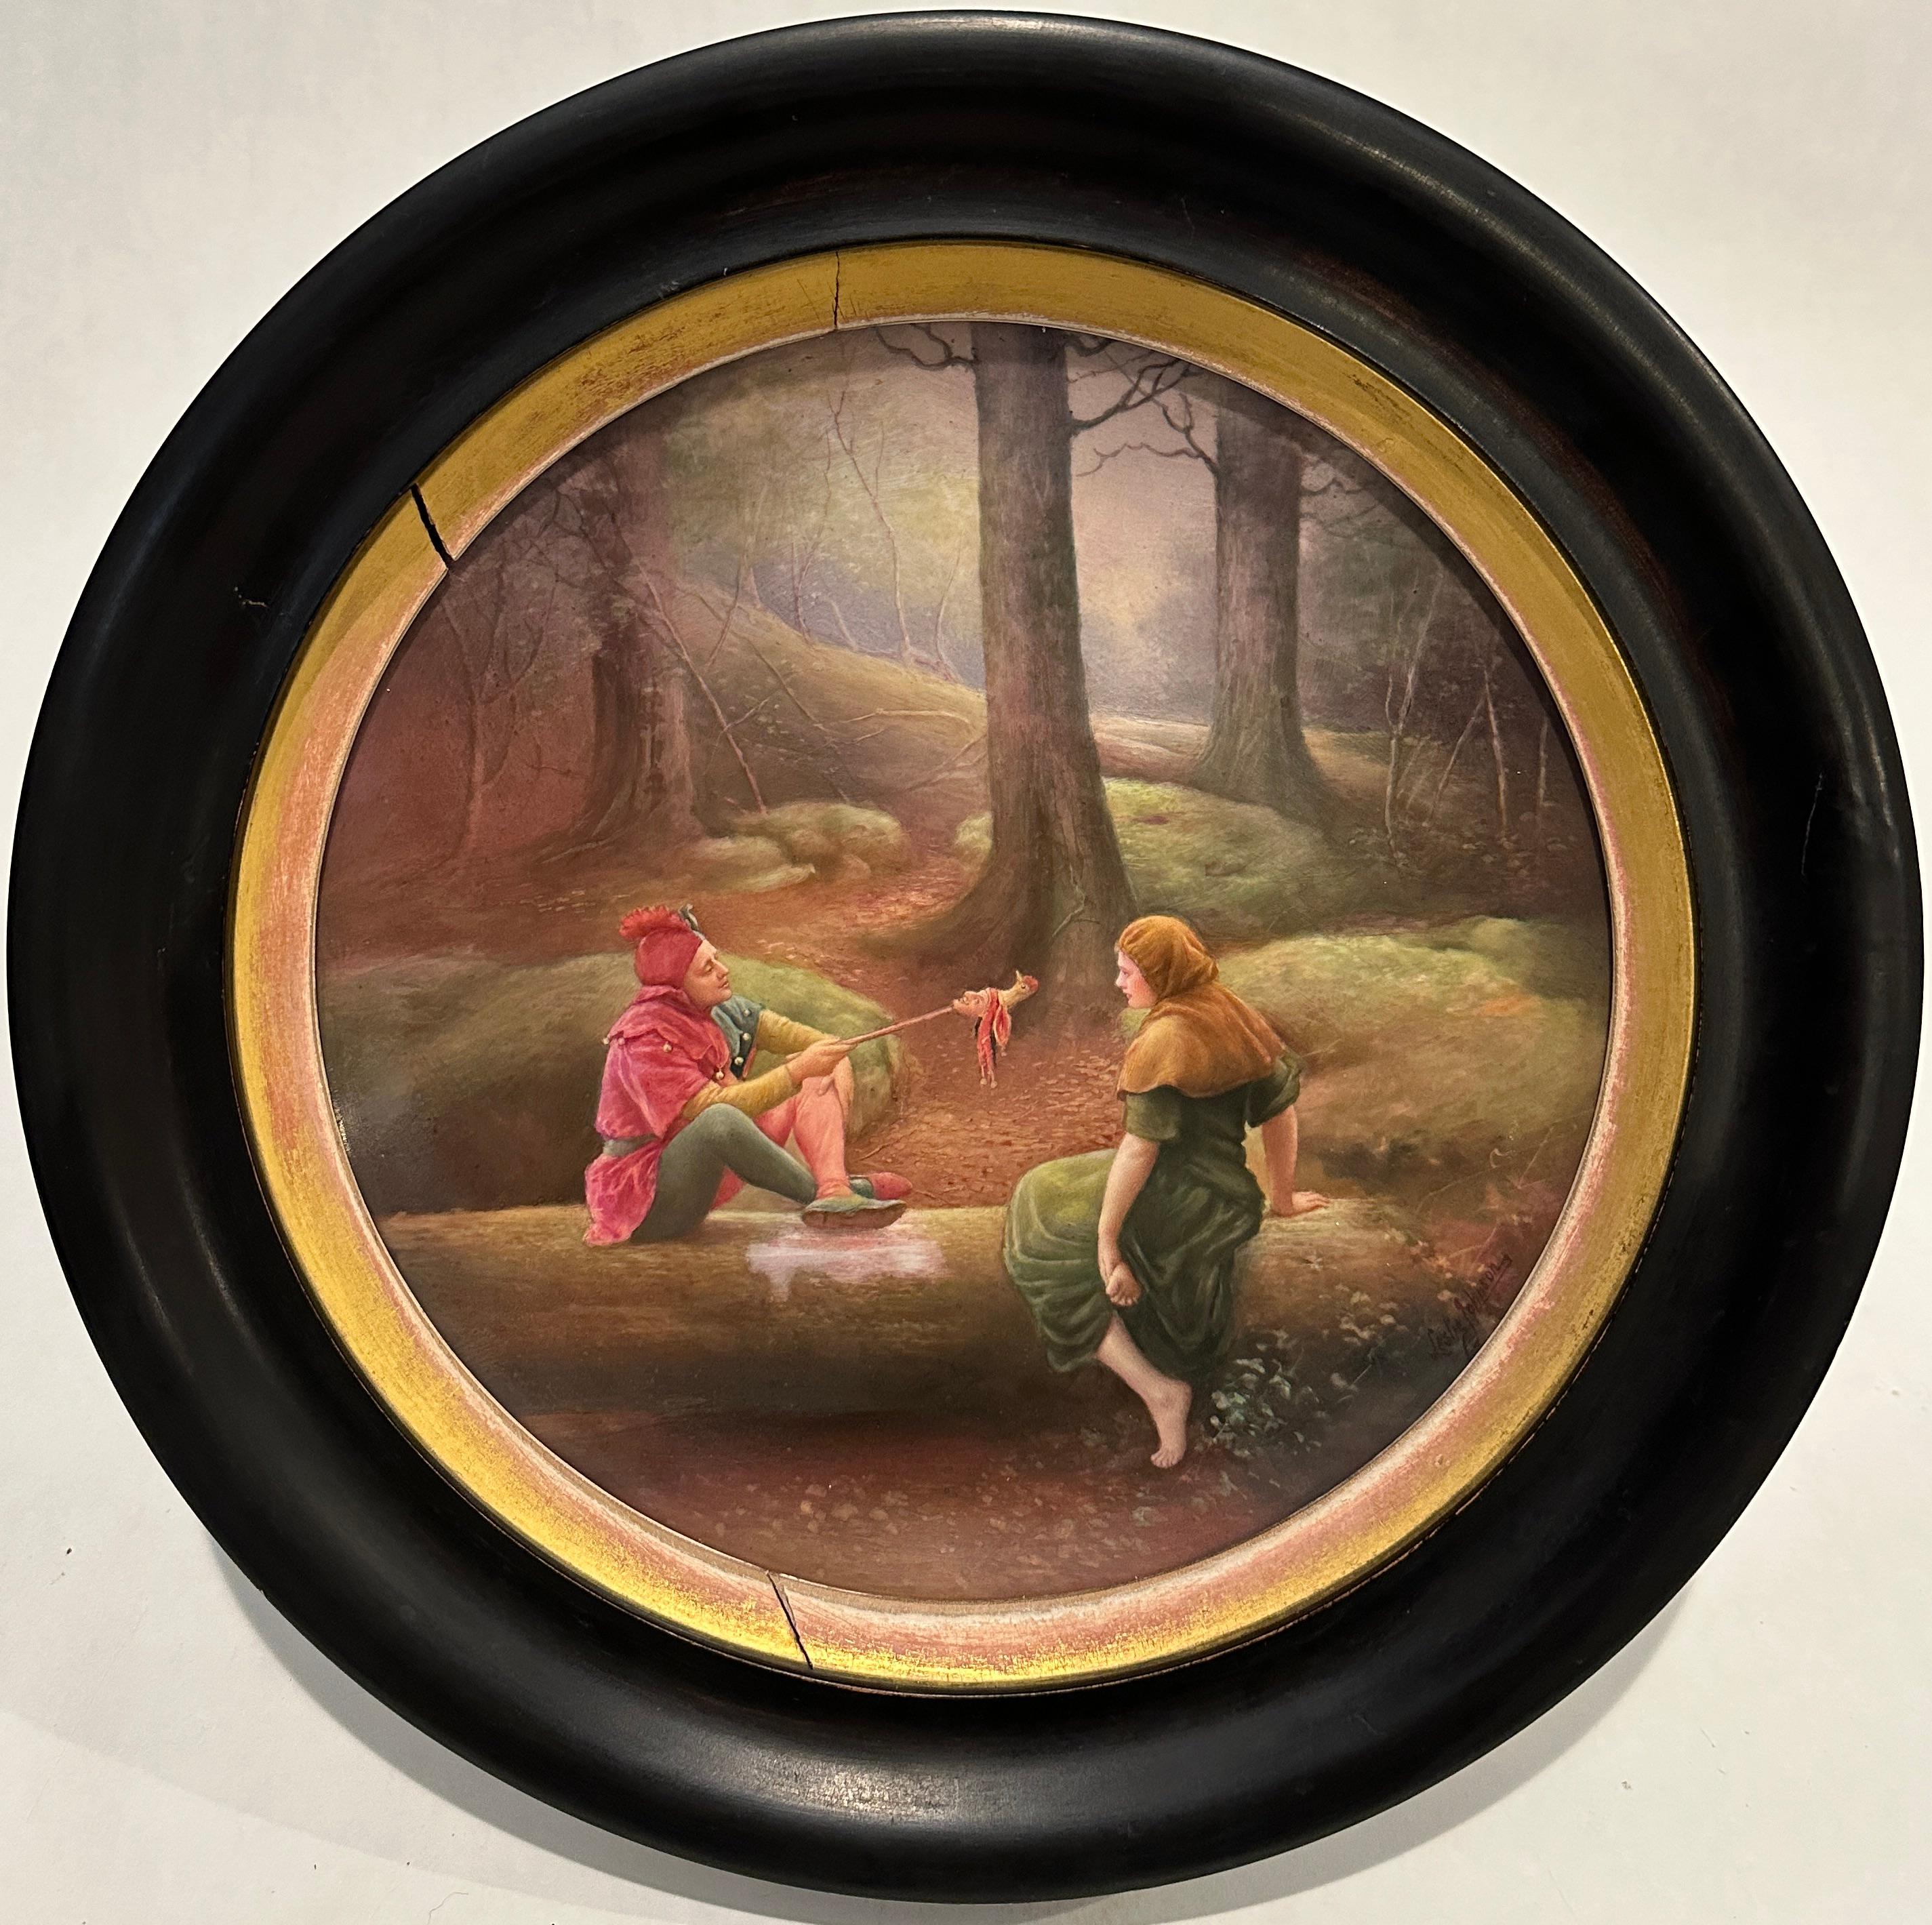 An exemplary late Victorian or Edwardian framed scenic plate, hand-decorated by artist Leslie Johnson, depicting a jester flirting with a young woman. Signed to lower right by Johnson, who was famous and sought after for his historical portraits.